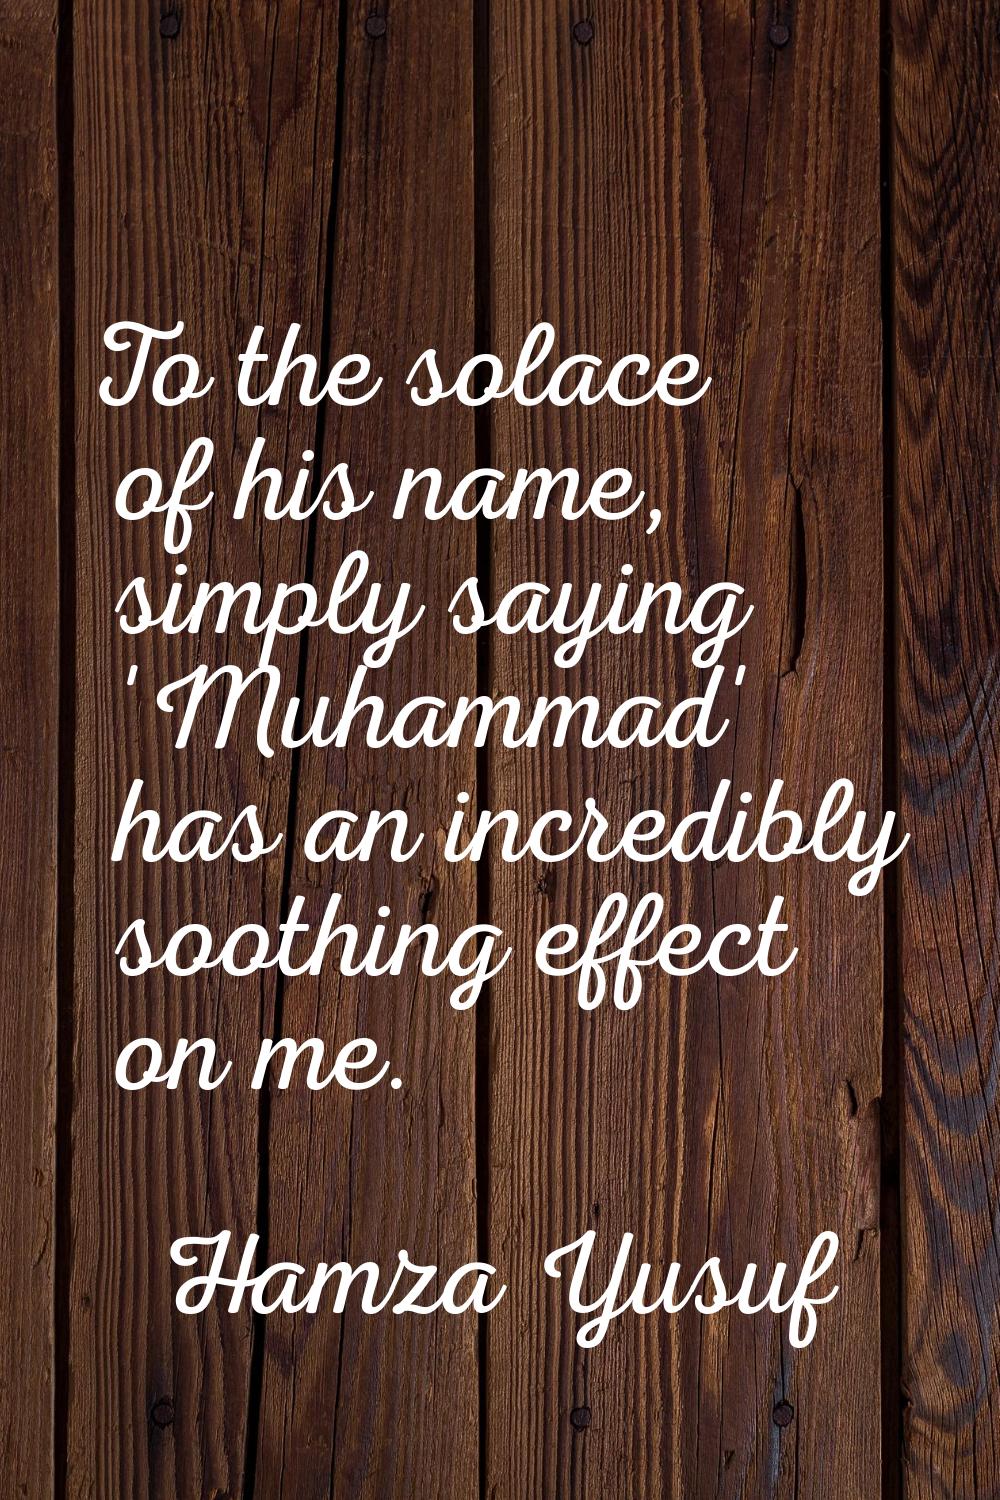 To the solace of his name, simply saying 'Muhammad' has an incredibly soothing effect on me.